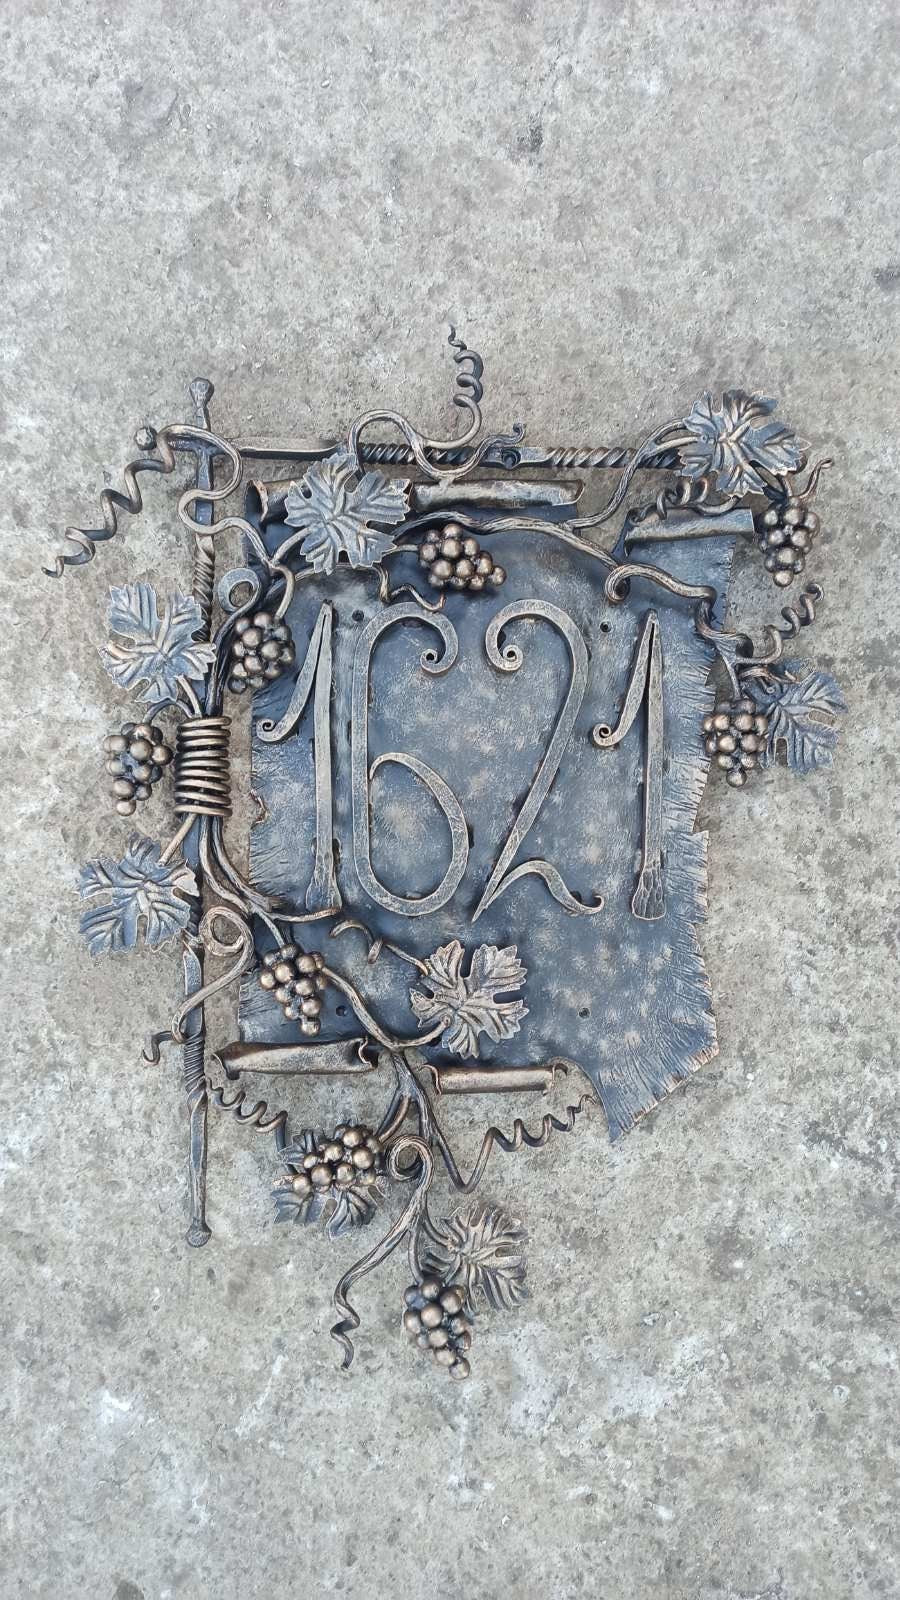 House number plate, address sign, address number, address, house number plaque, grapes, vine, grapevine, wine decor, birthday, anniversary